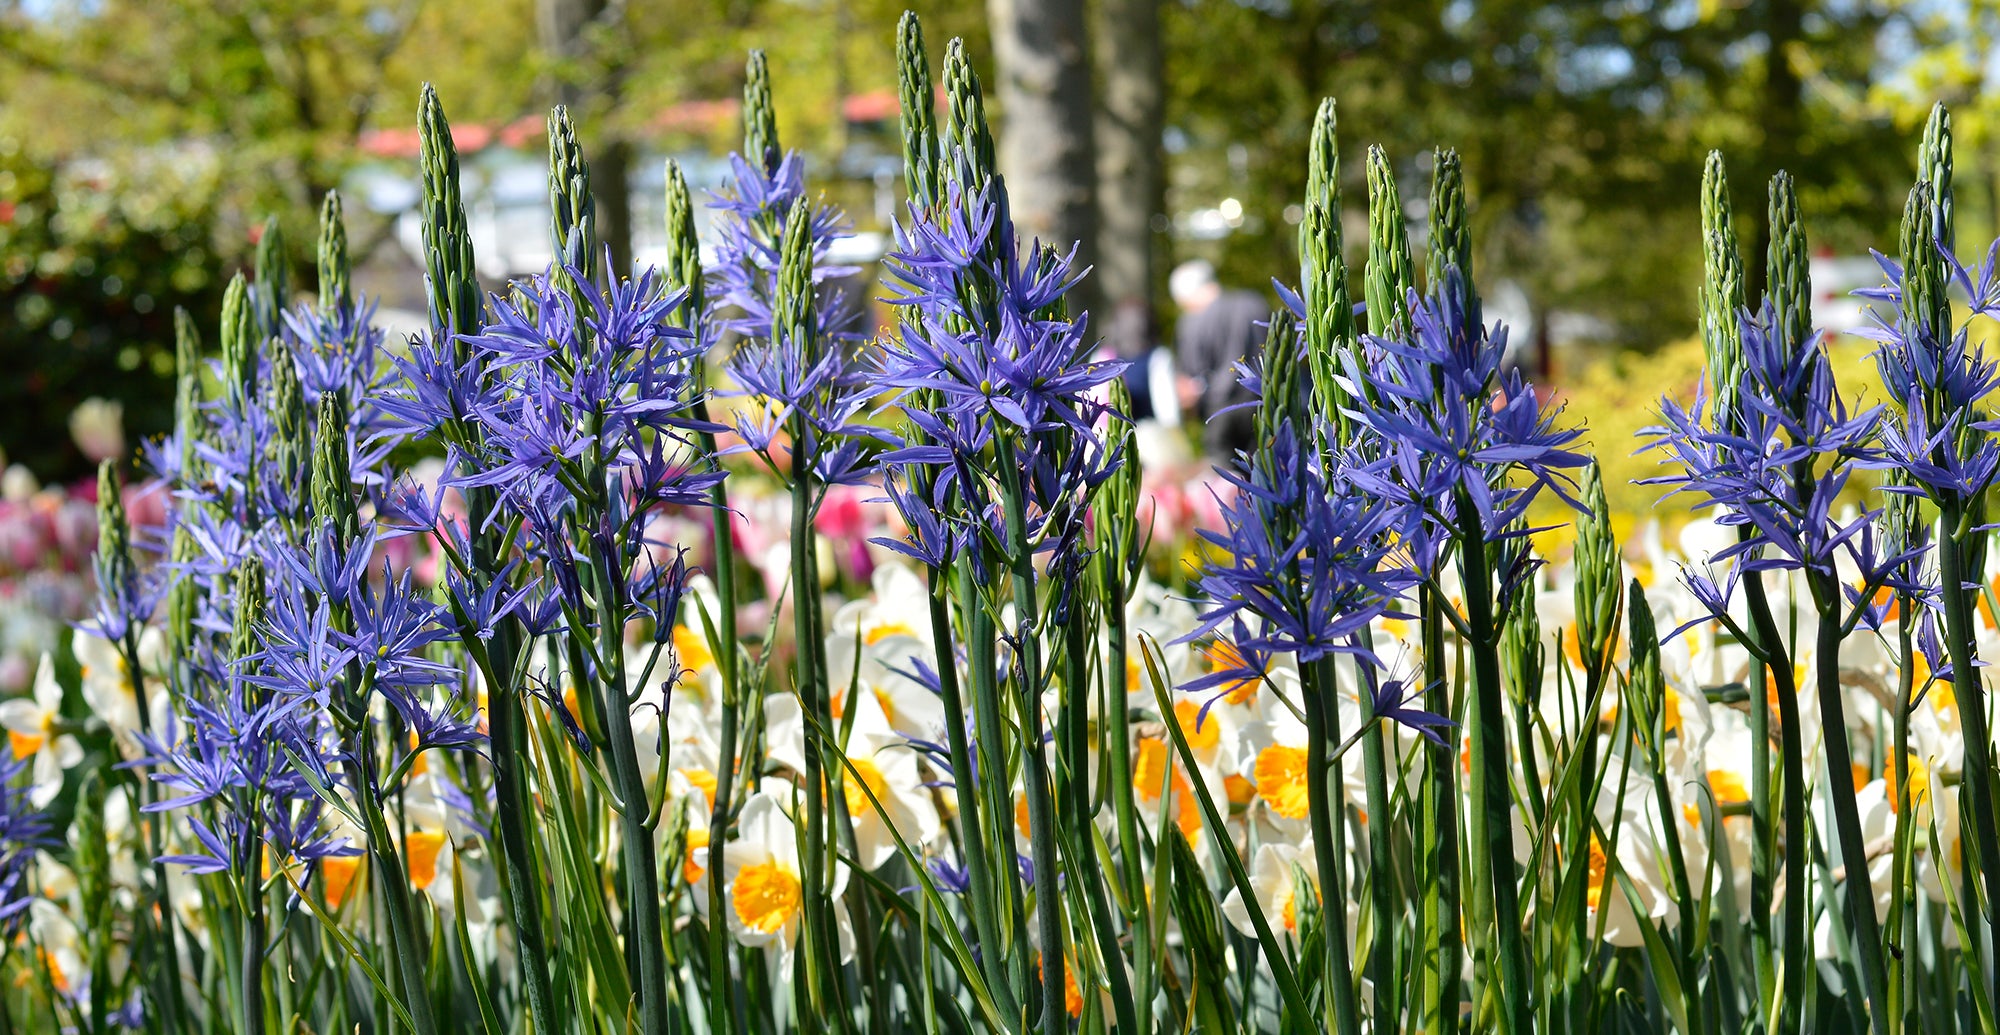 How to grow camas lilies - planting guide